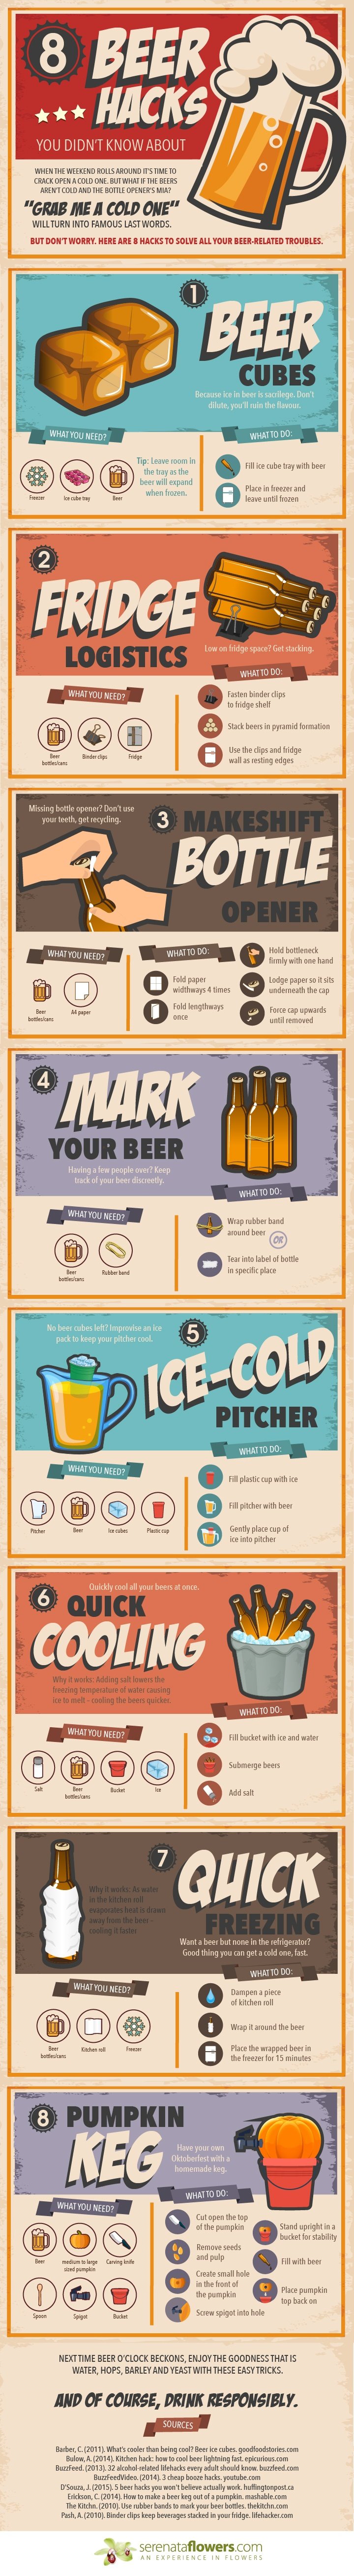 8-Beer-hacks-you-didn't-know-about-V1